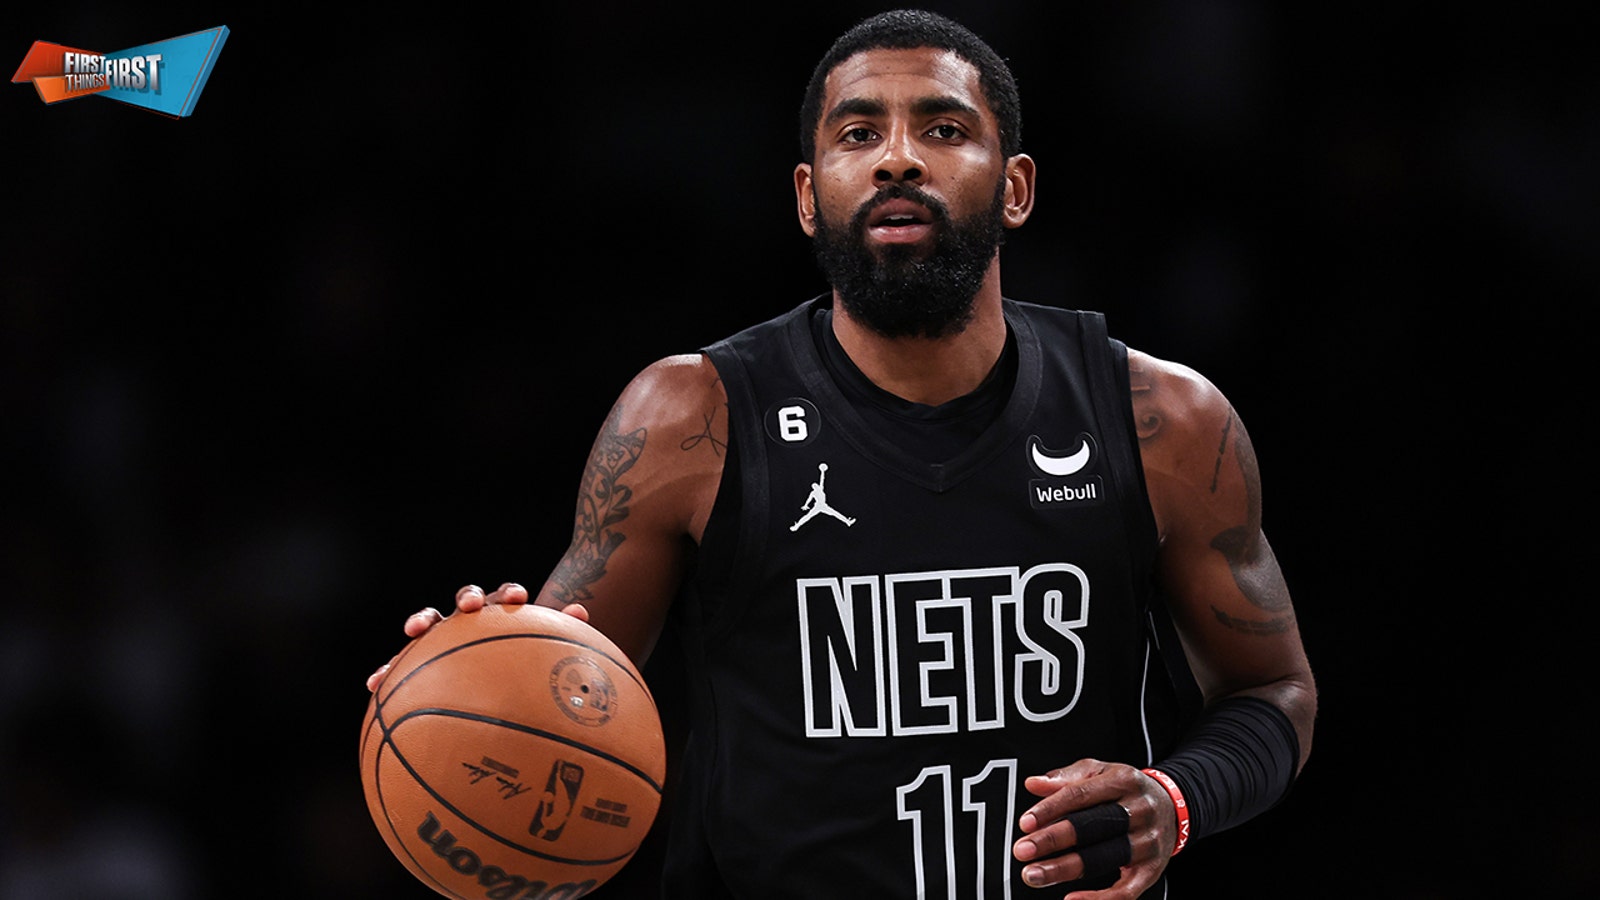 Nets suspend Kyrie Irving minimum 5 games for controversial social media post